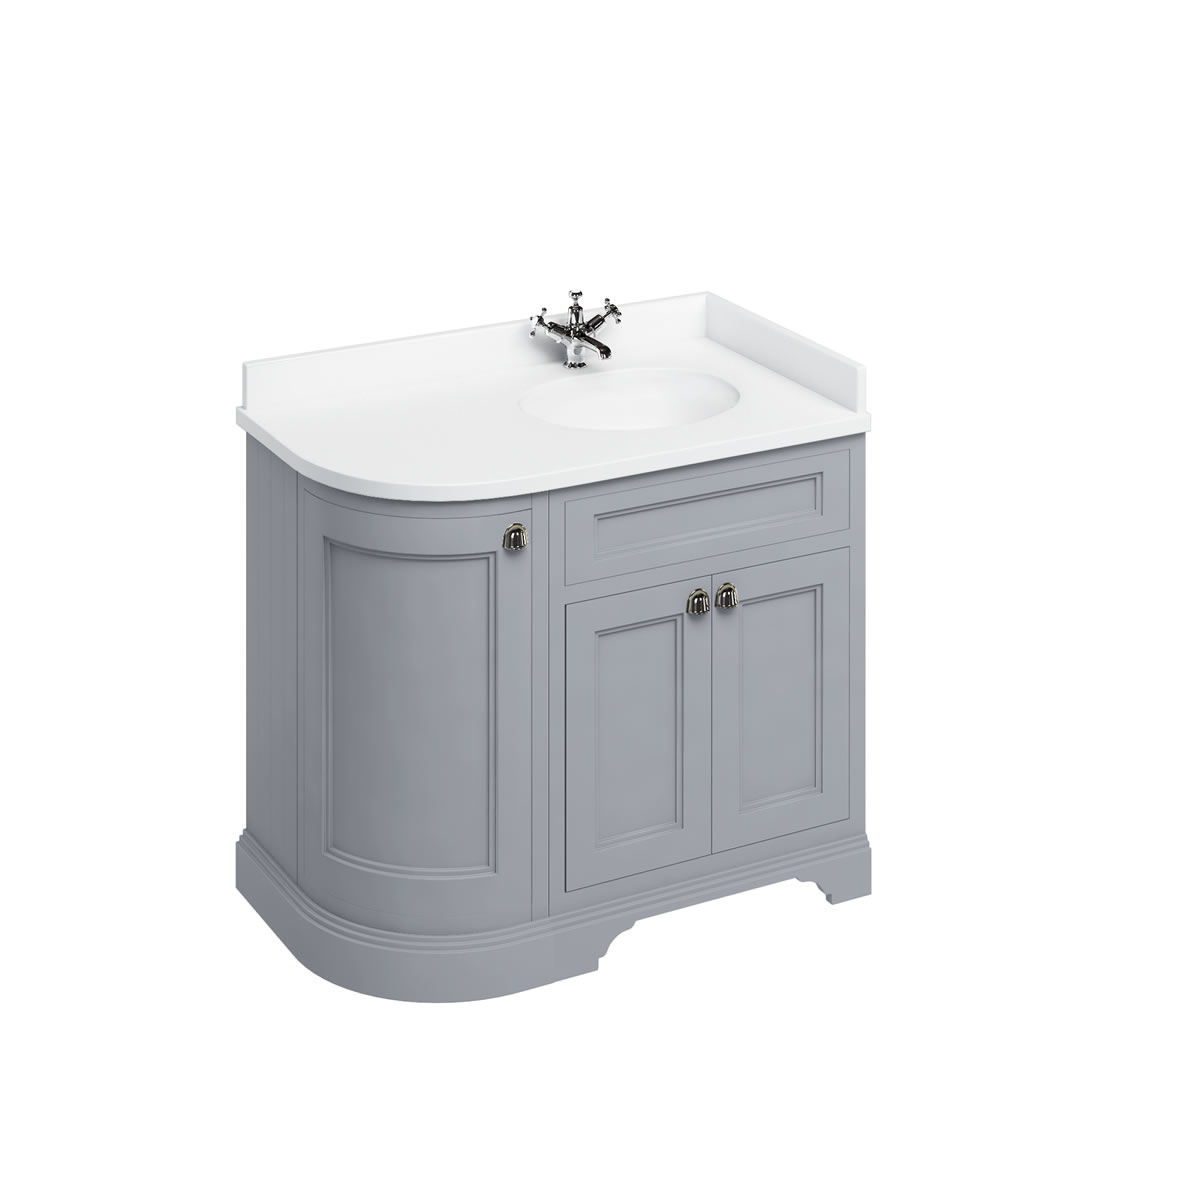 Freestanding 100 Curved Corner Vanity Unit Right Hand - Classic Grey and Minerva white worktop with integrated white basin 